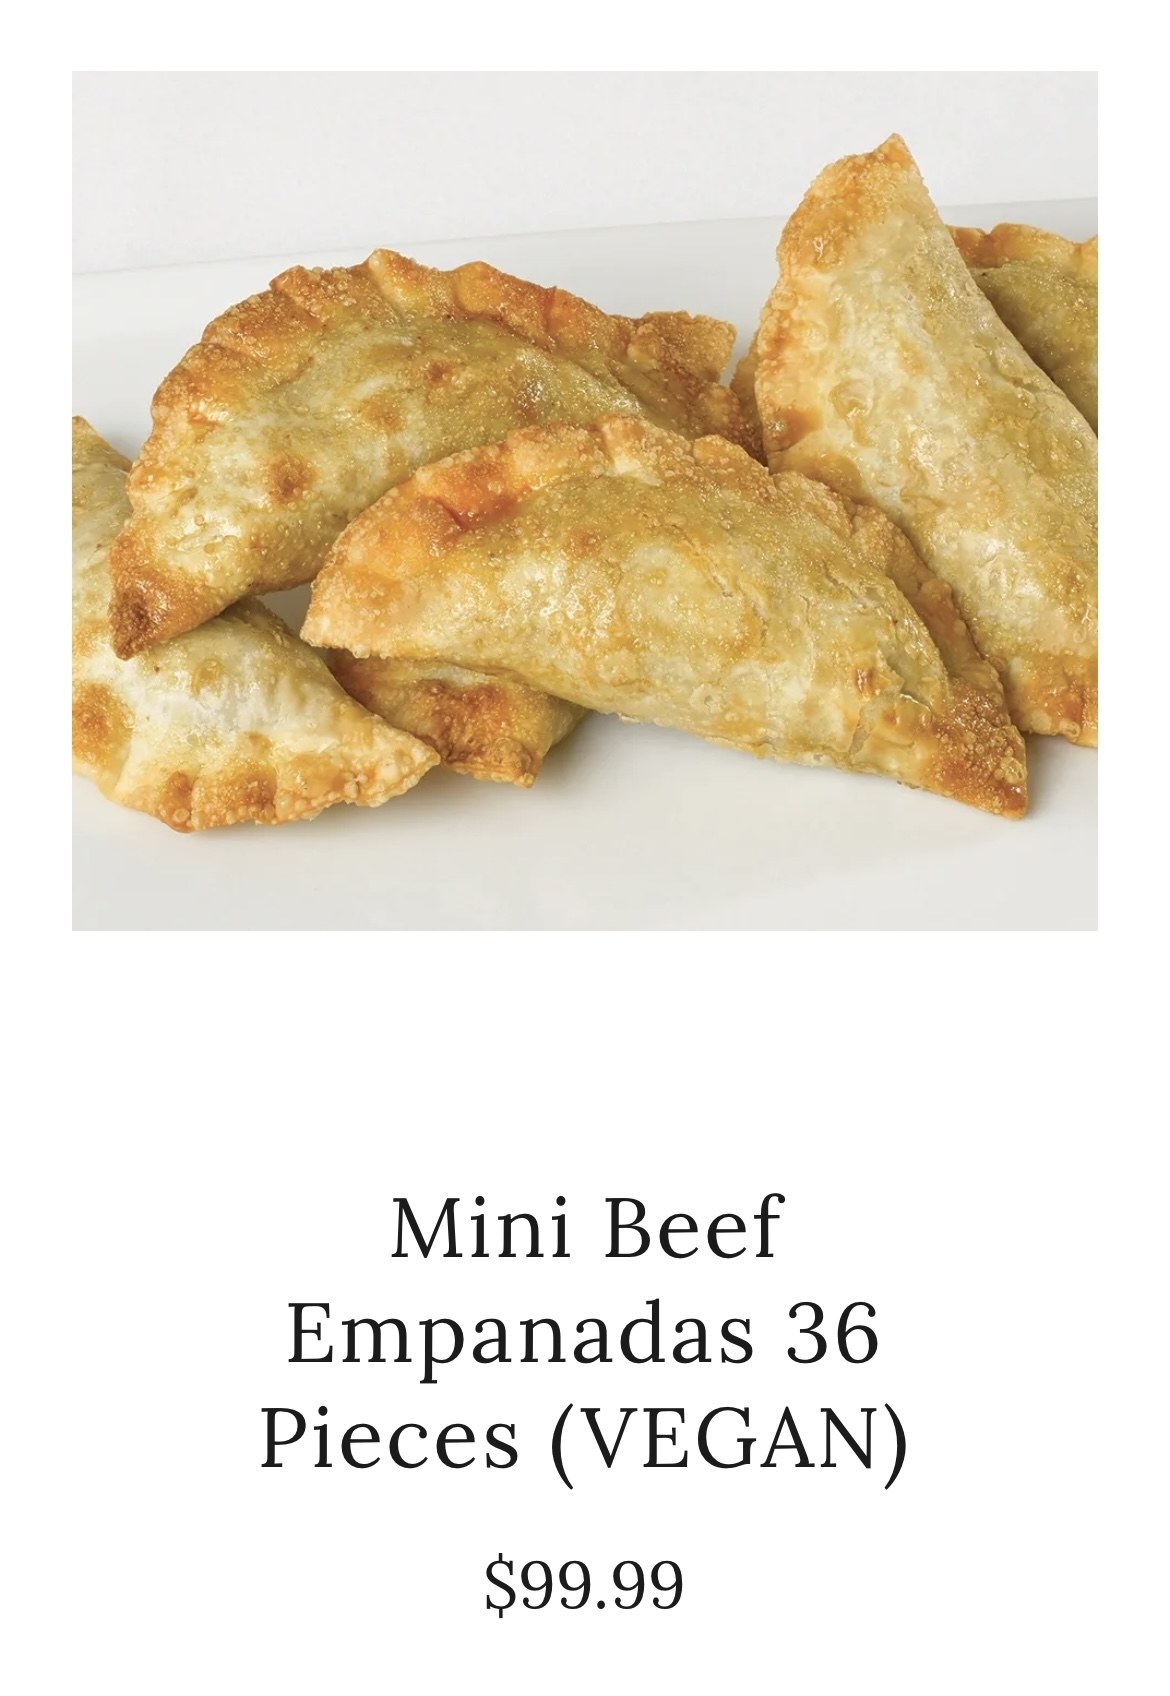 A screenshot of the website showing the price of 36 empanadas